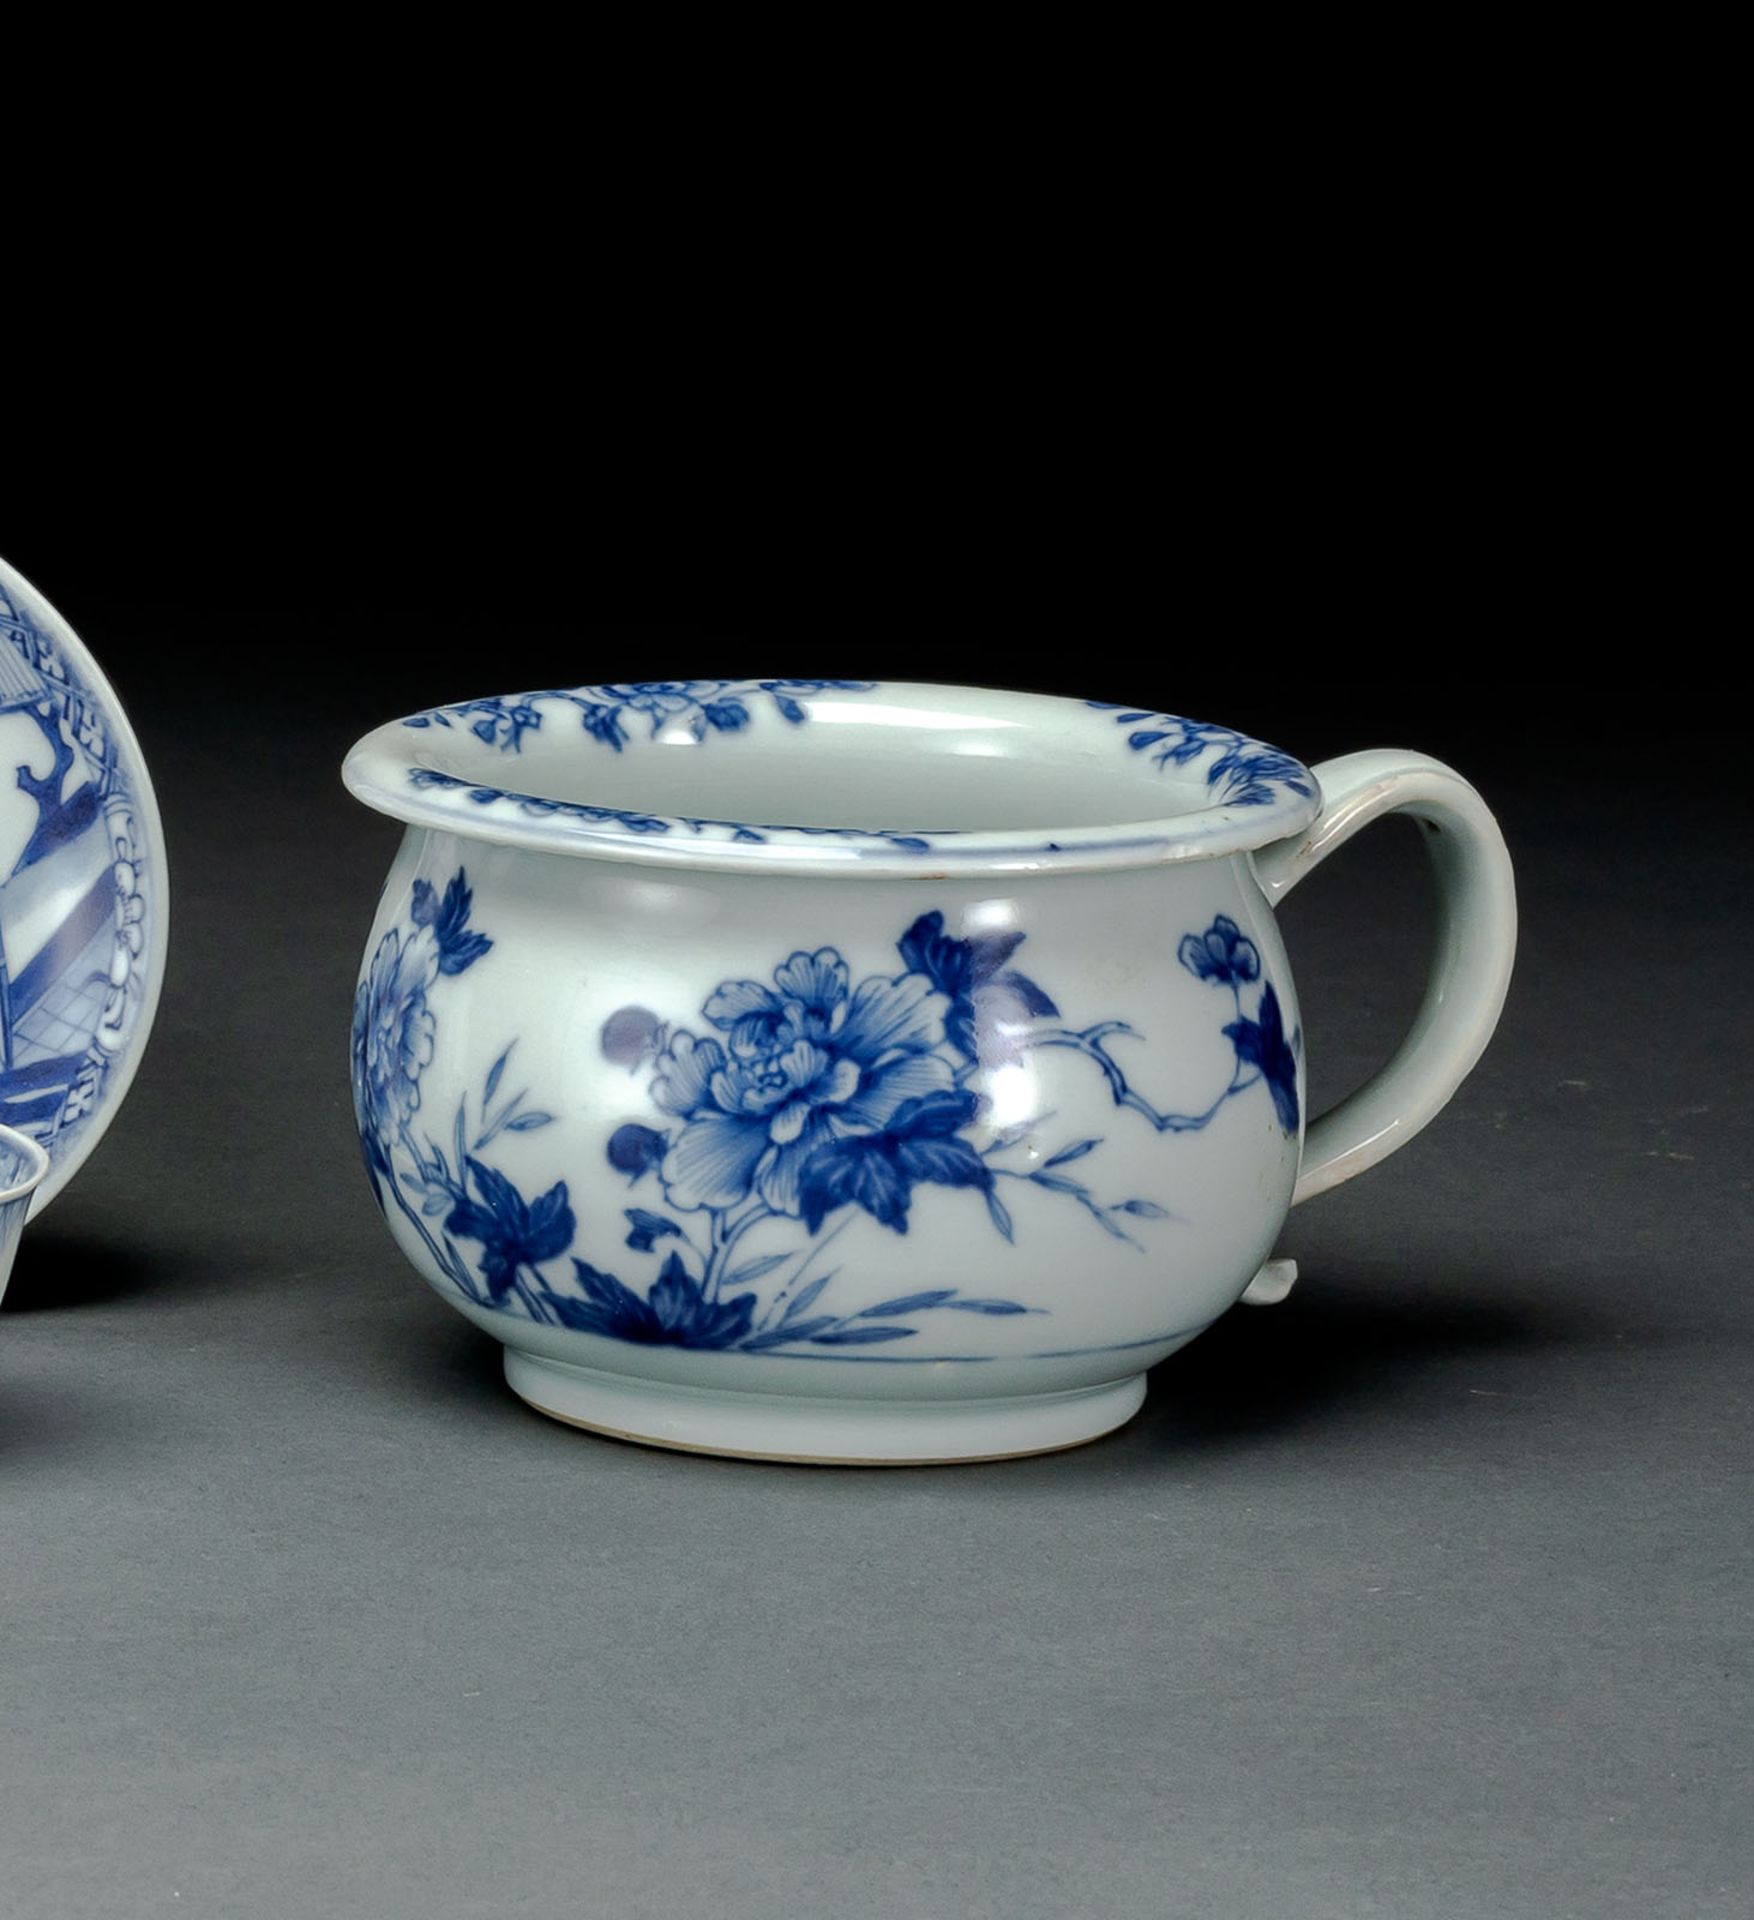 A BLUE AND WHITE PORCELAIN CHAMBER POT FROM THE NANKING CARGO